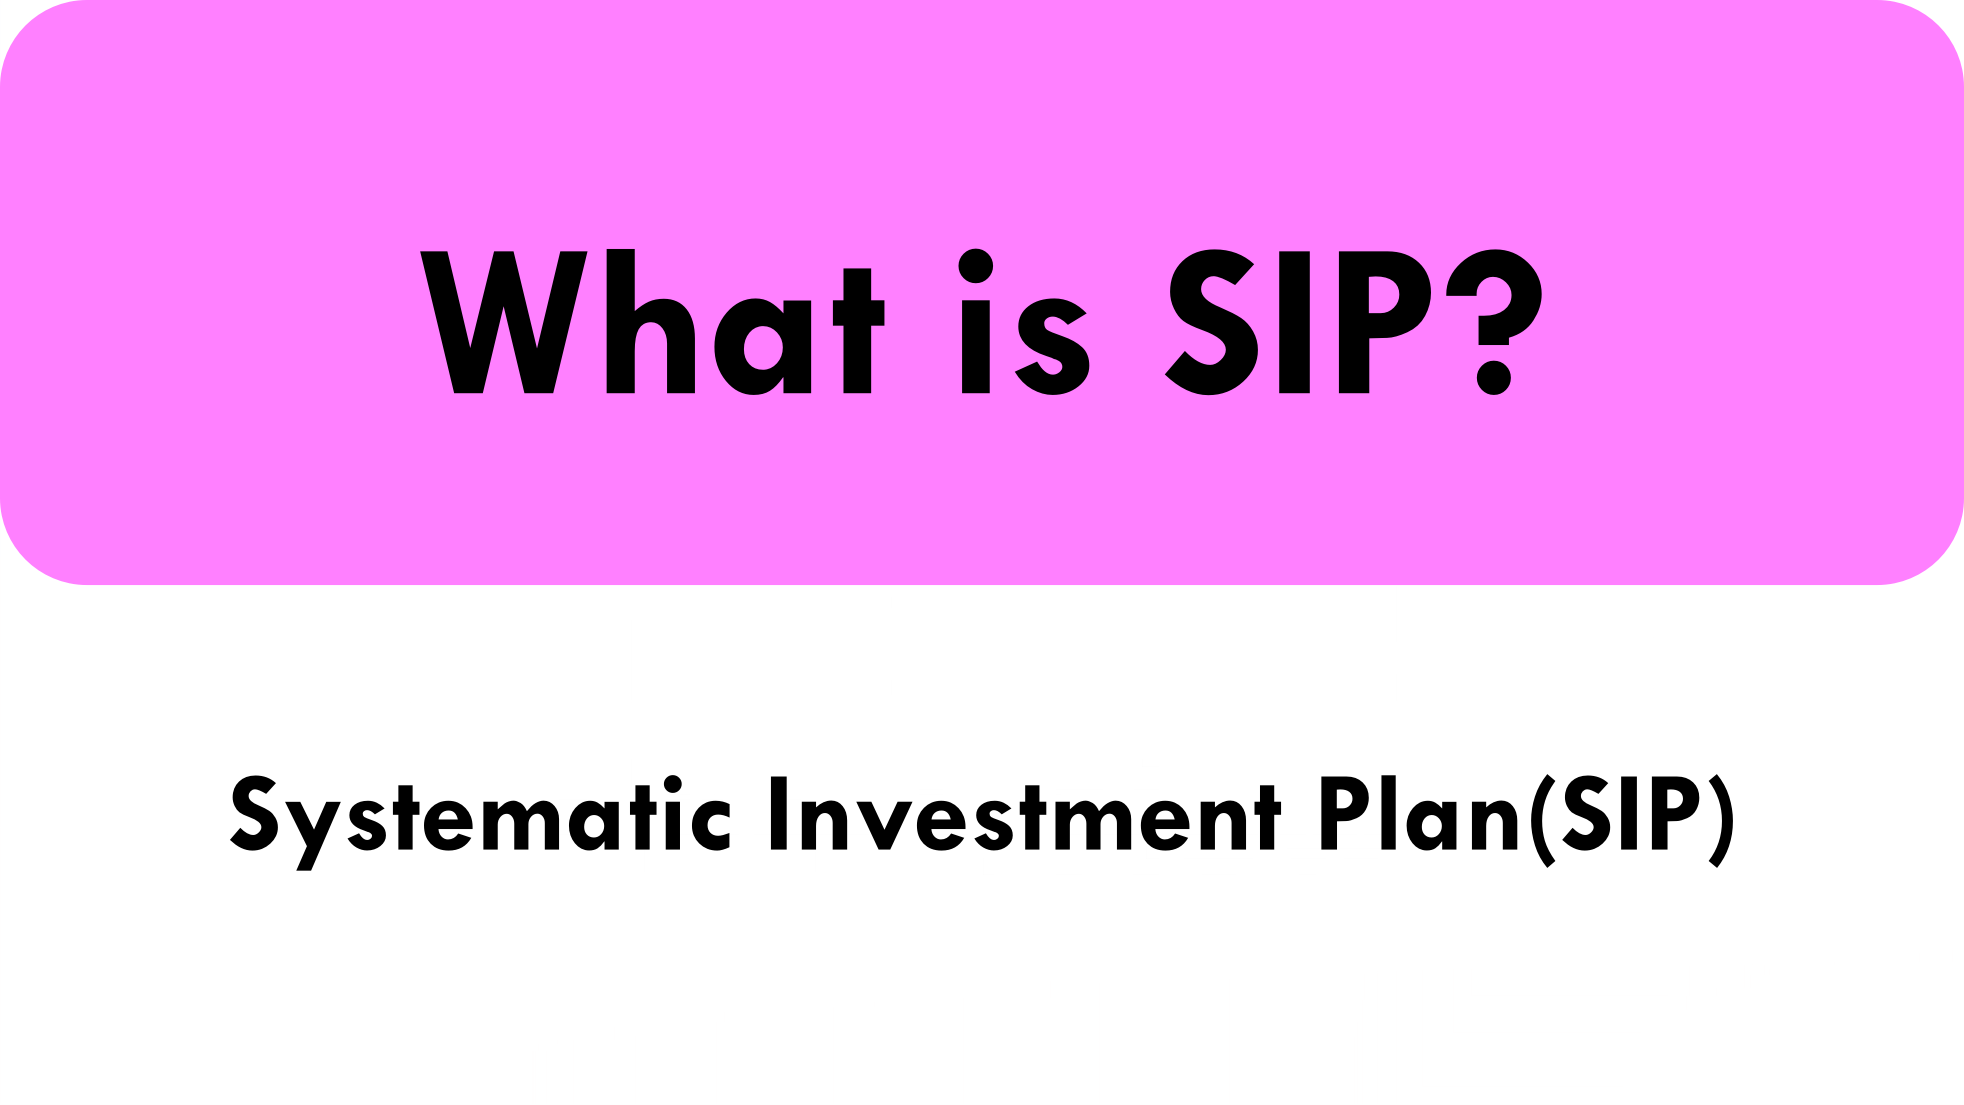 What is SIP